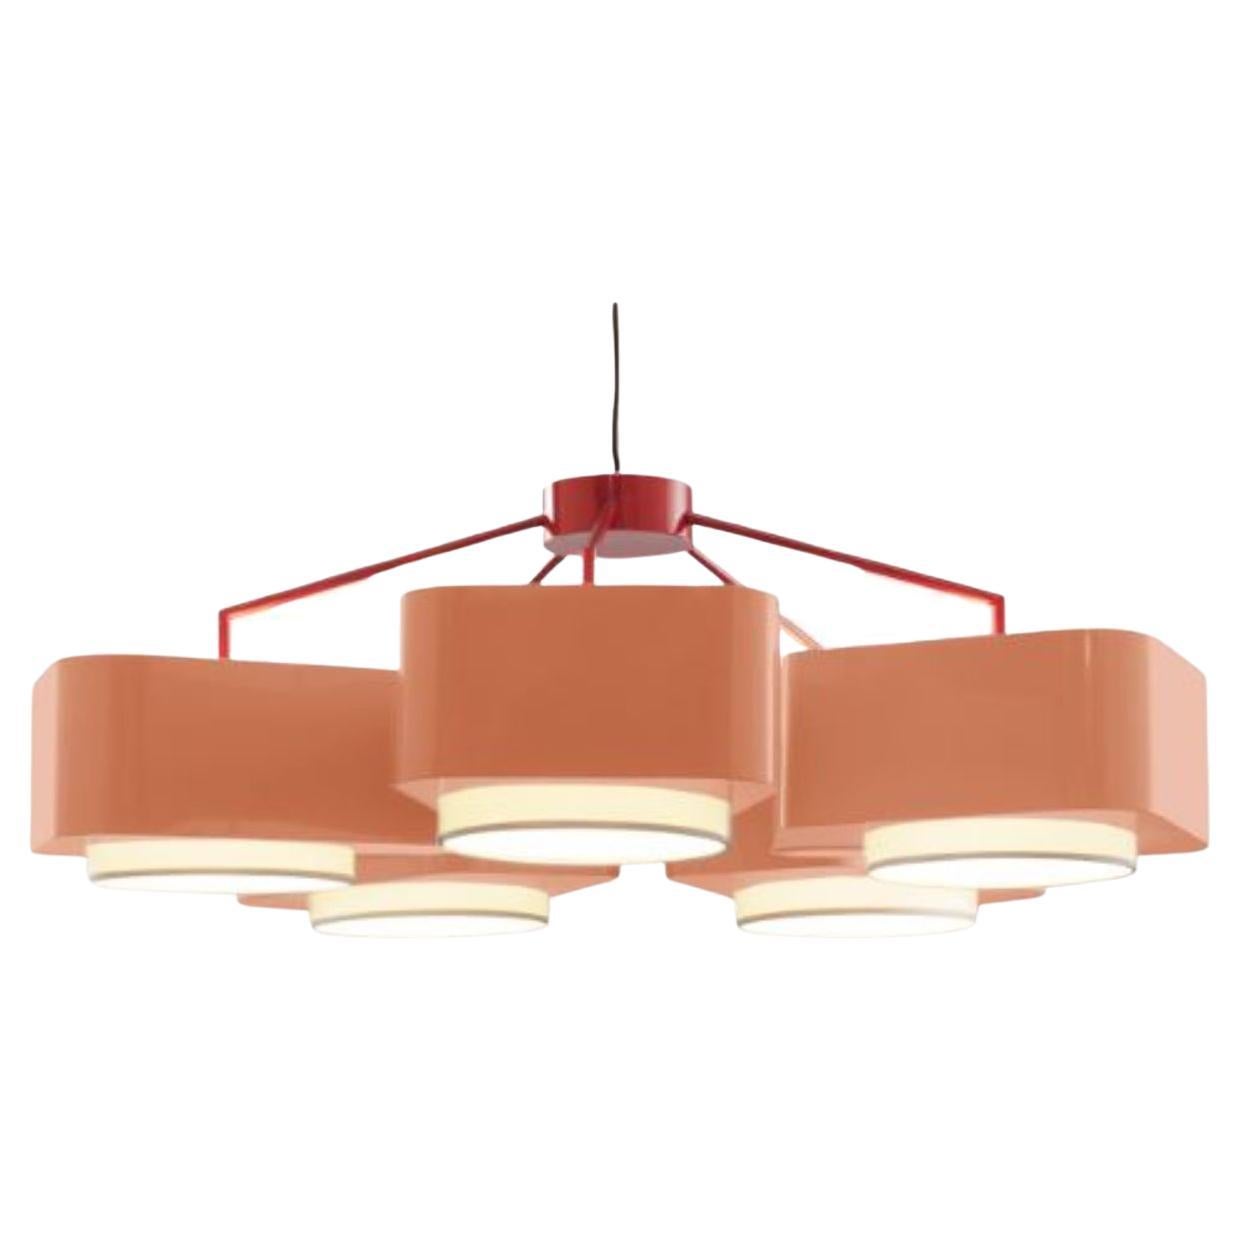 Lipstick and Salmon Carousel Suspension Lamp by Dooq